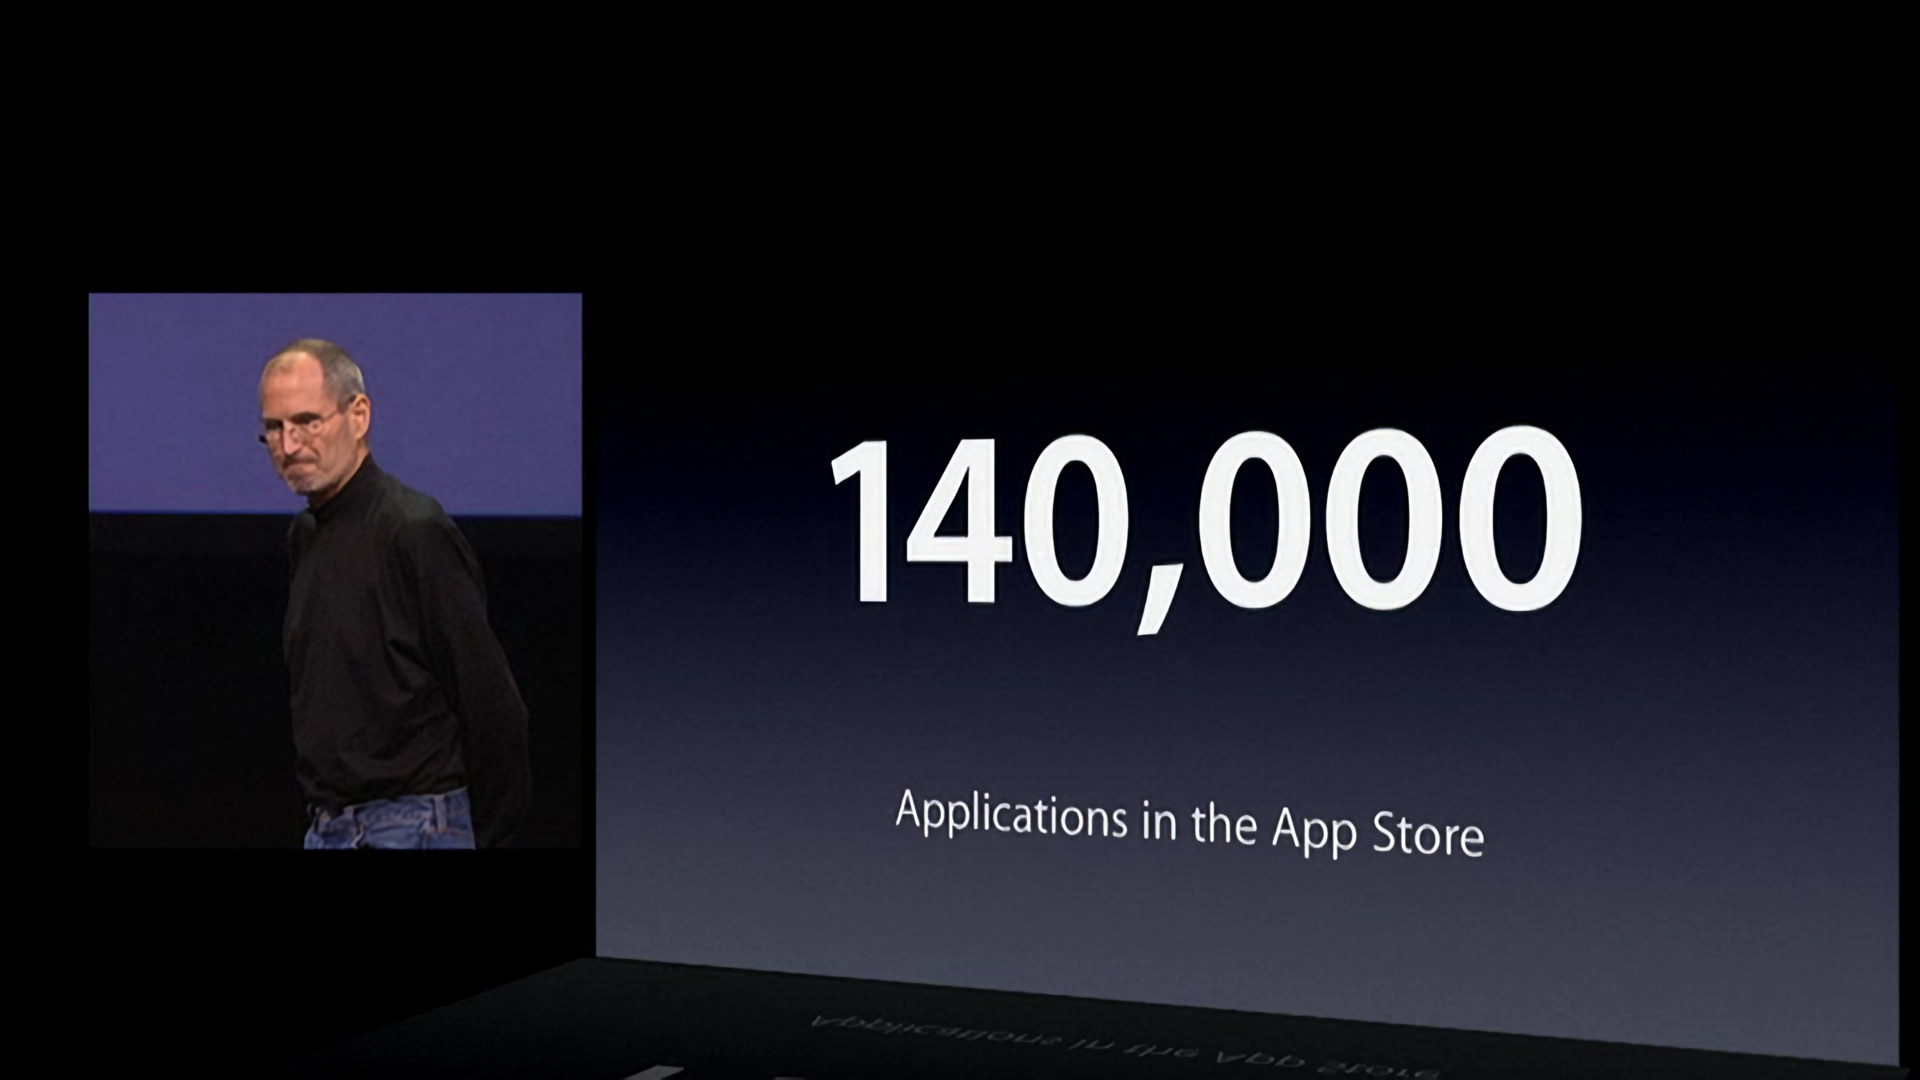 After only 18 months, there were 140,000 apps on the App Store that customers had downloaded over three billion times.